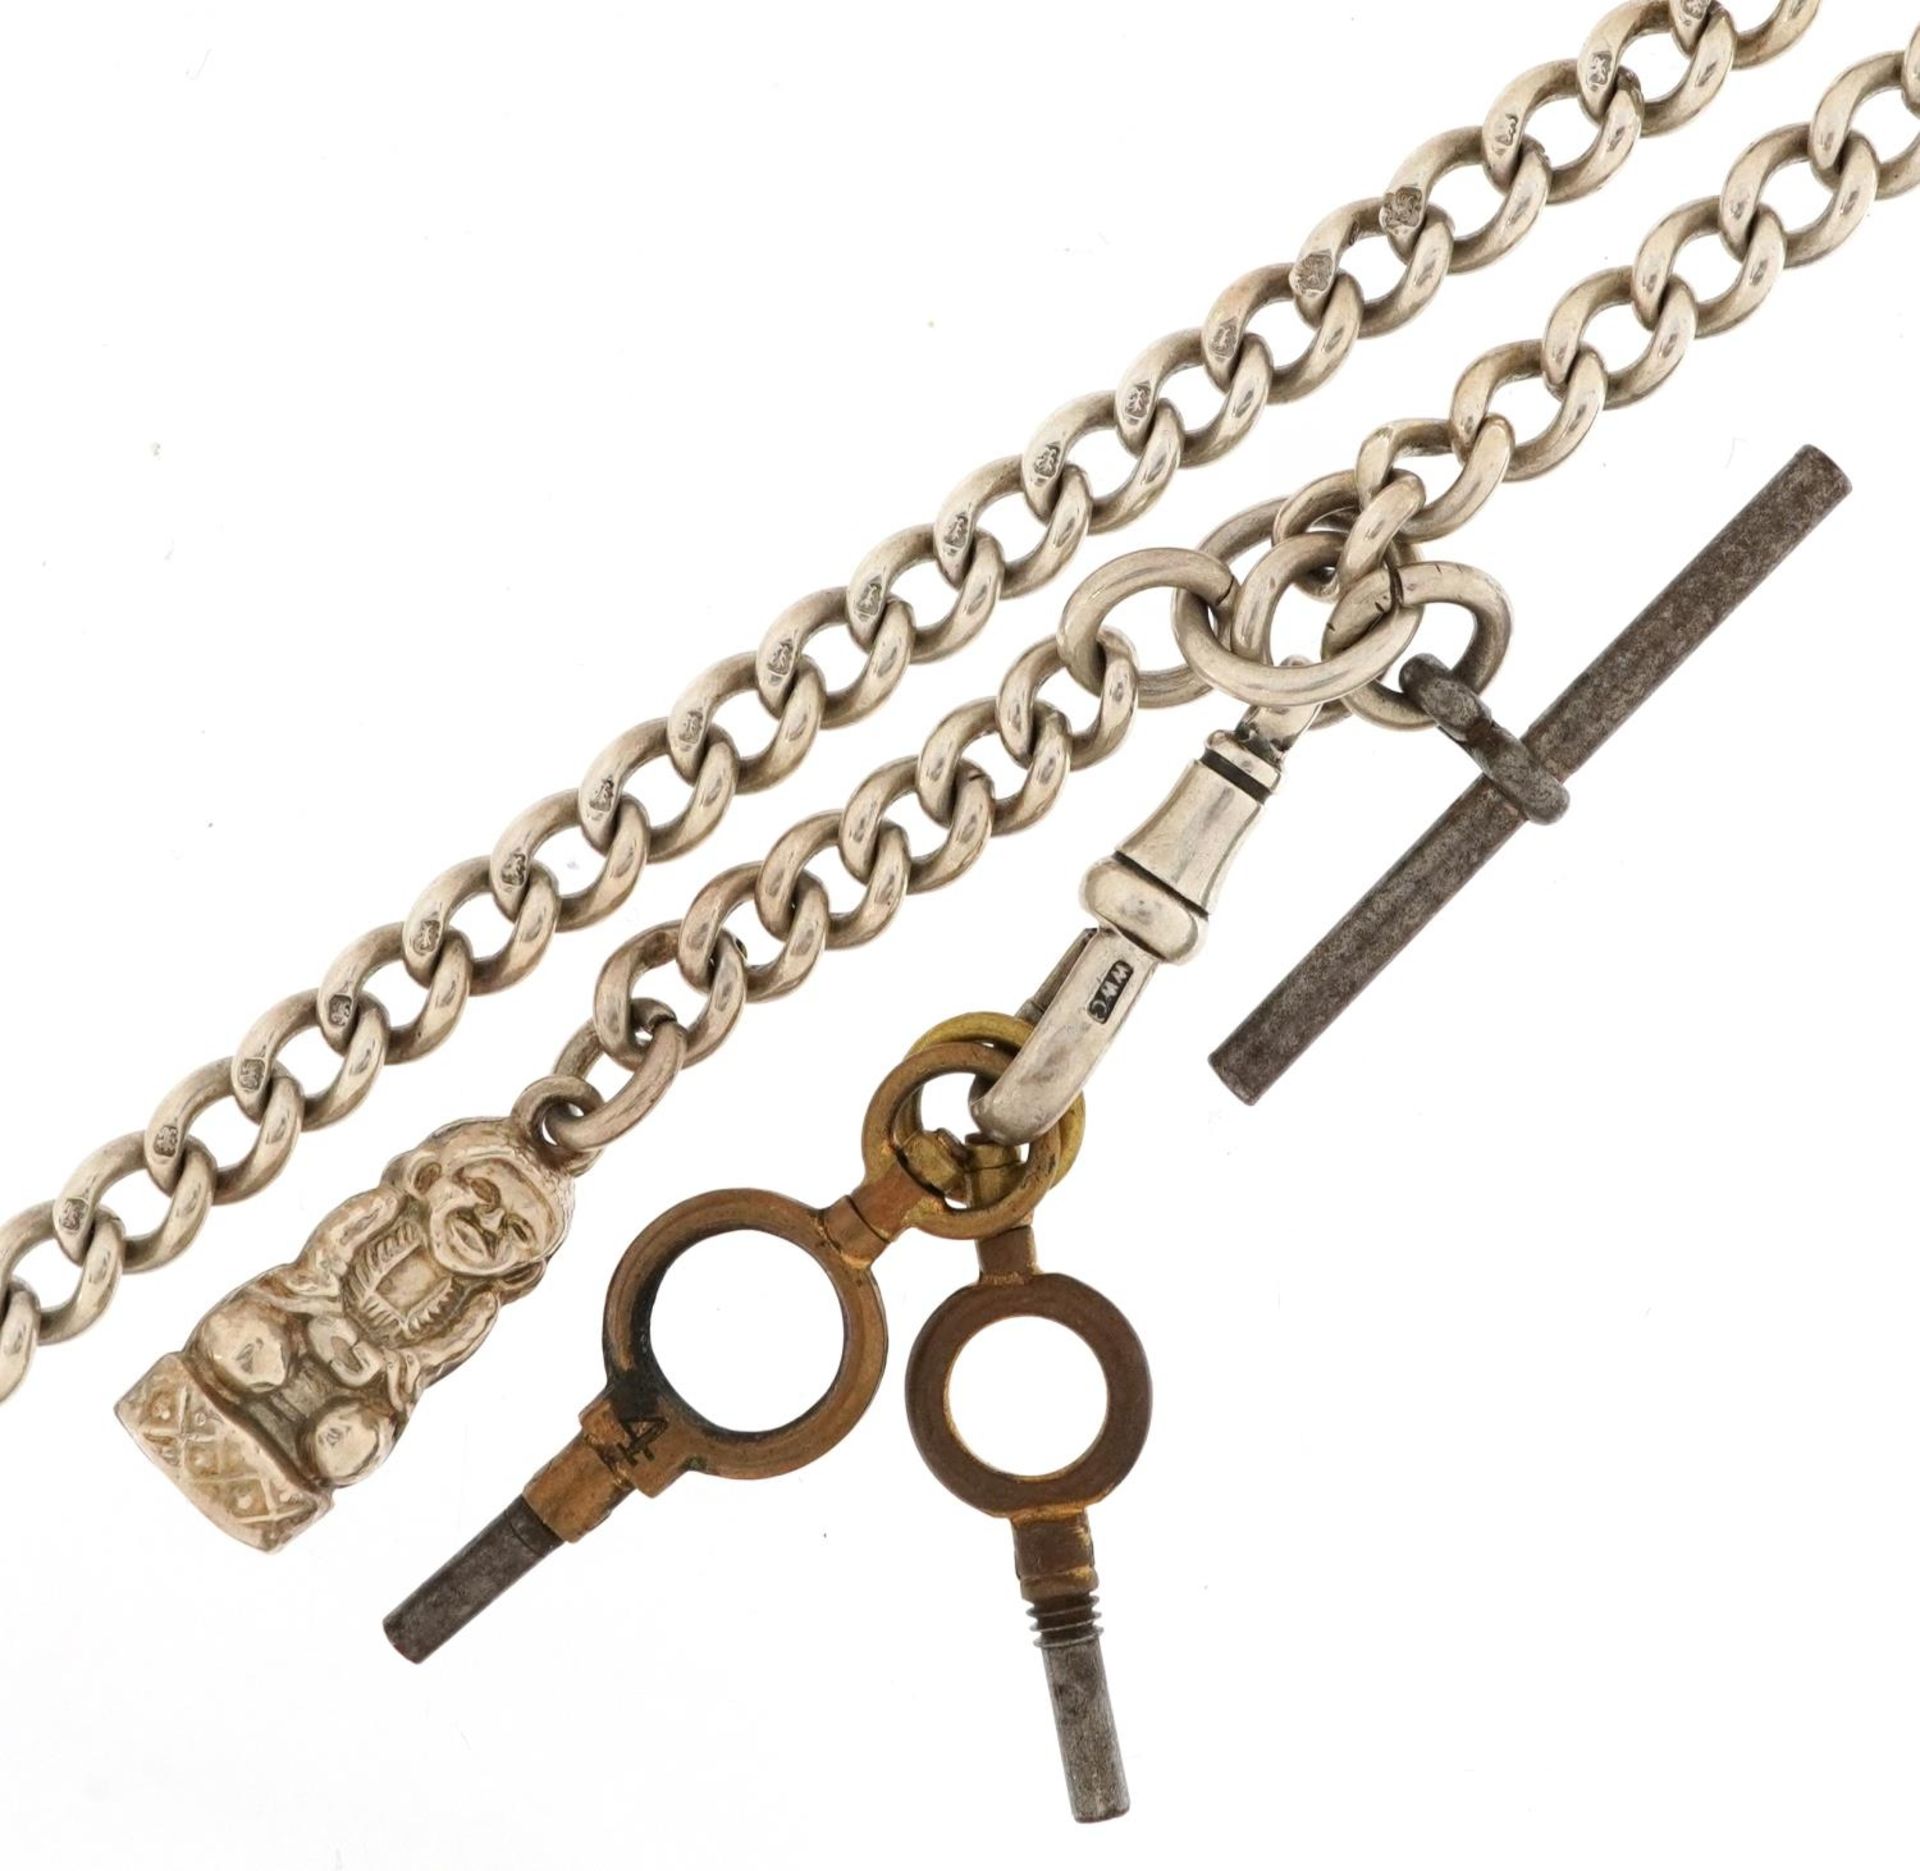 Gentlemen's silver watch chain with T bar, charm and two watch keys, total 41.3g : For further